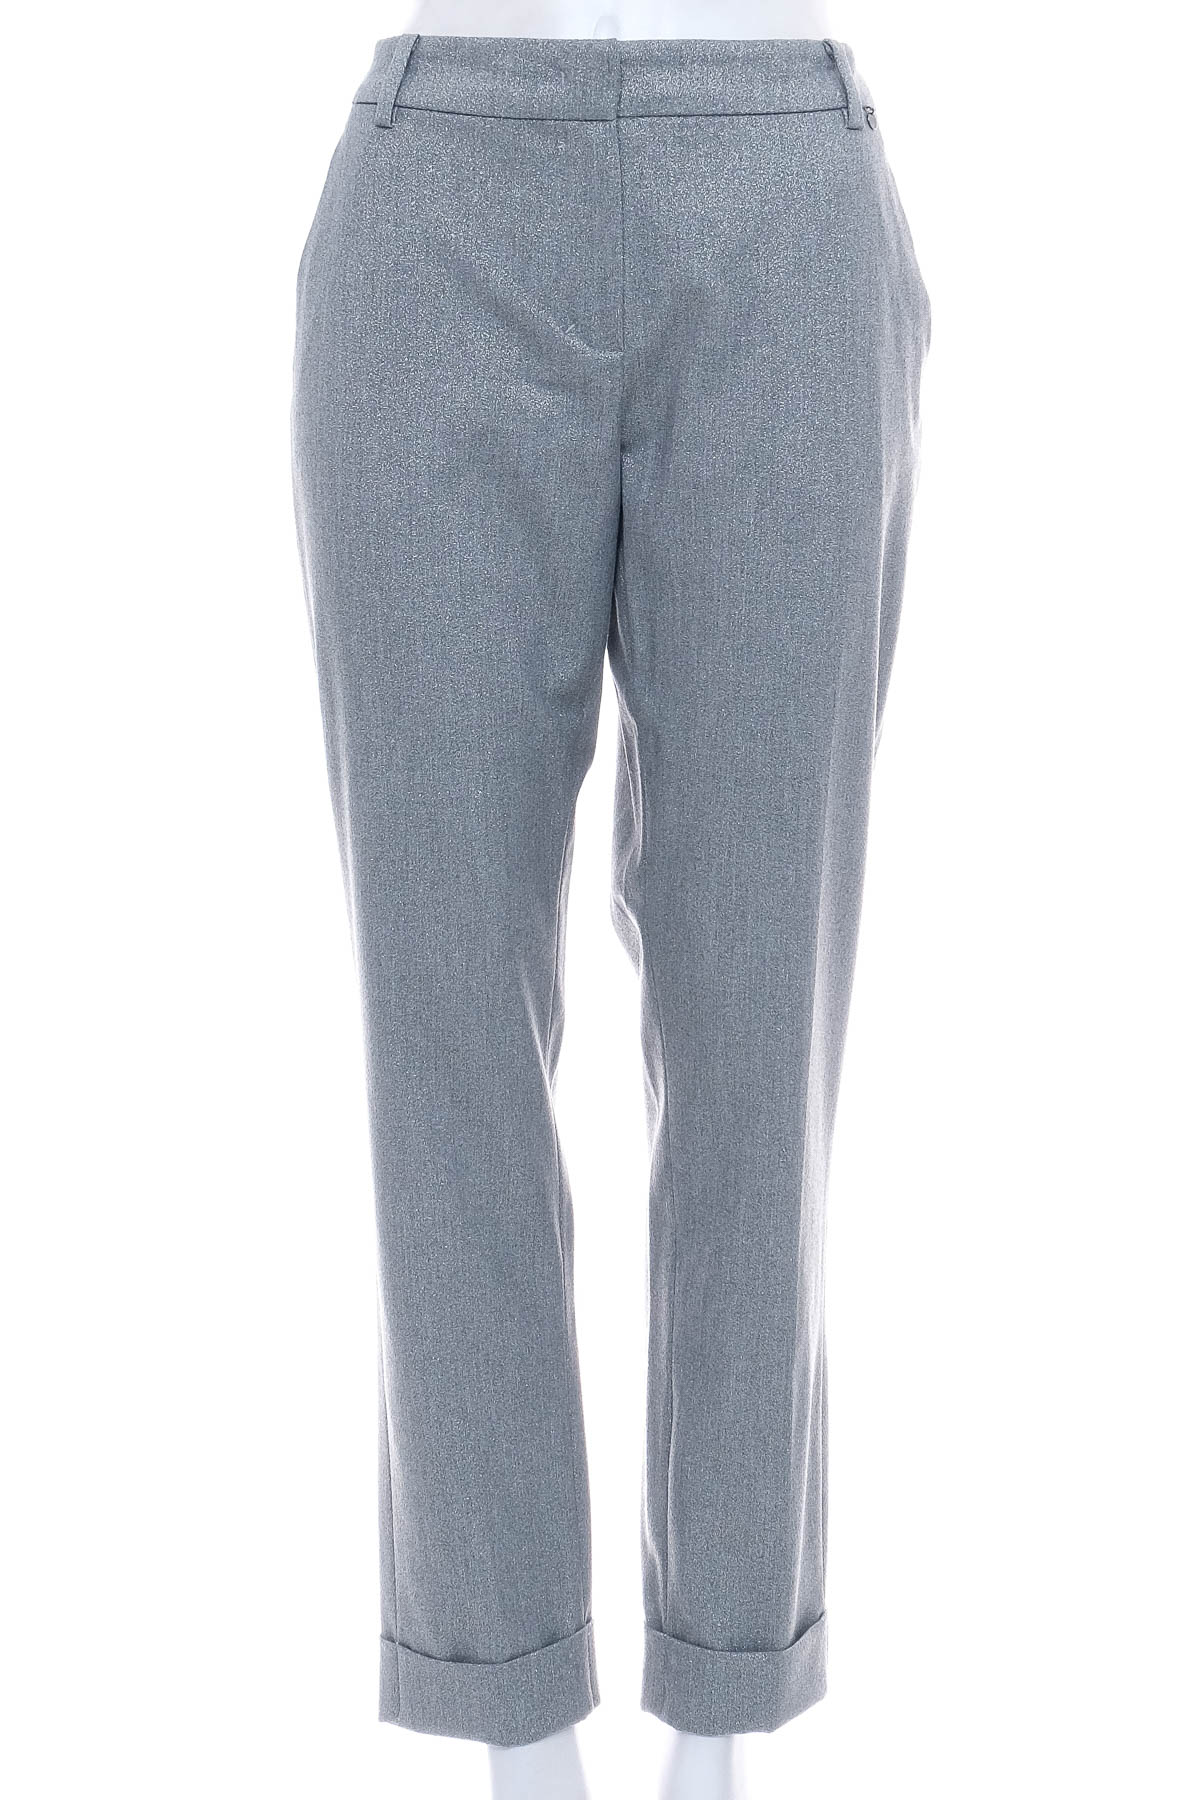 Women's trousers - River Woods - 0